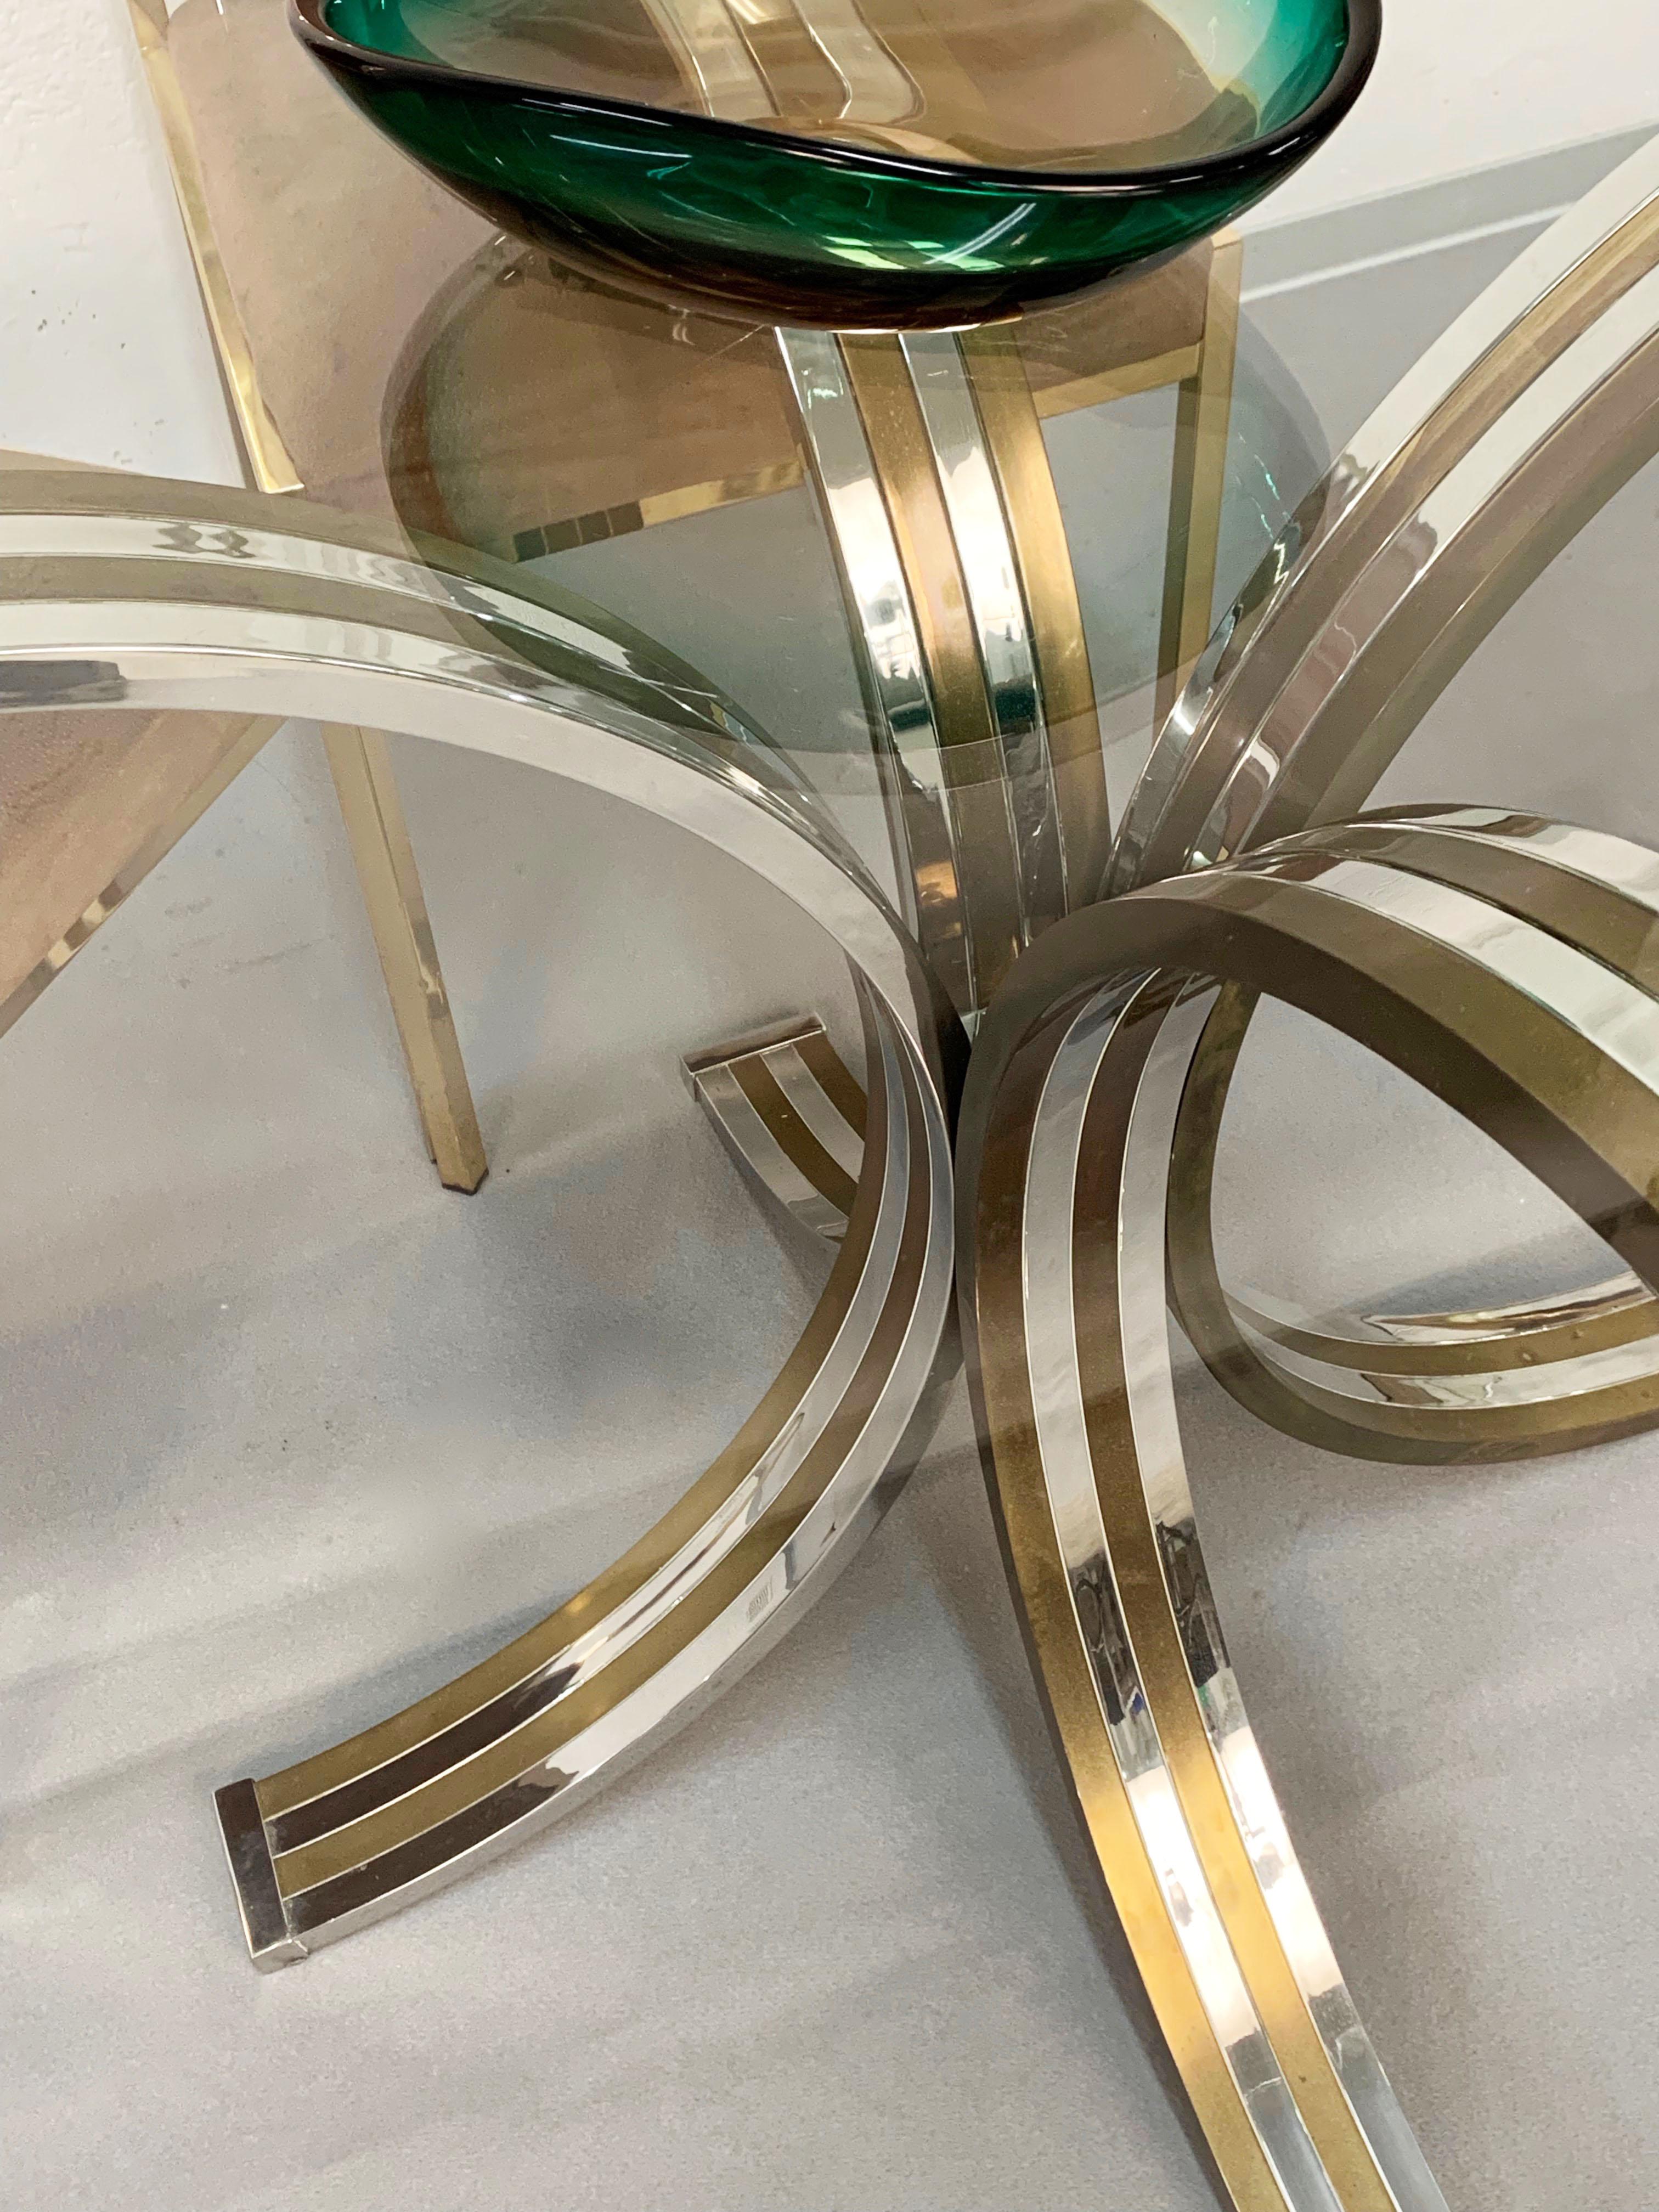 Romeo Rega style dining table in burnished brass and chrome steel.
The upper octagonal part is very thick 15 mm. Italian design from the 1970s, excellent vintage condition.
Measuring 130 cm wide and 77 high.
We can also supply the upper part in